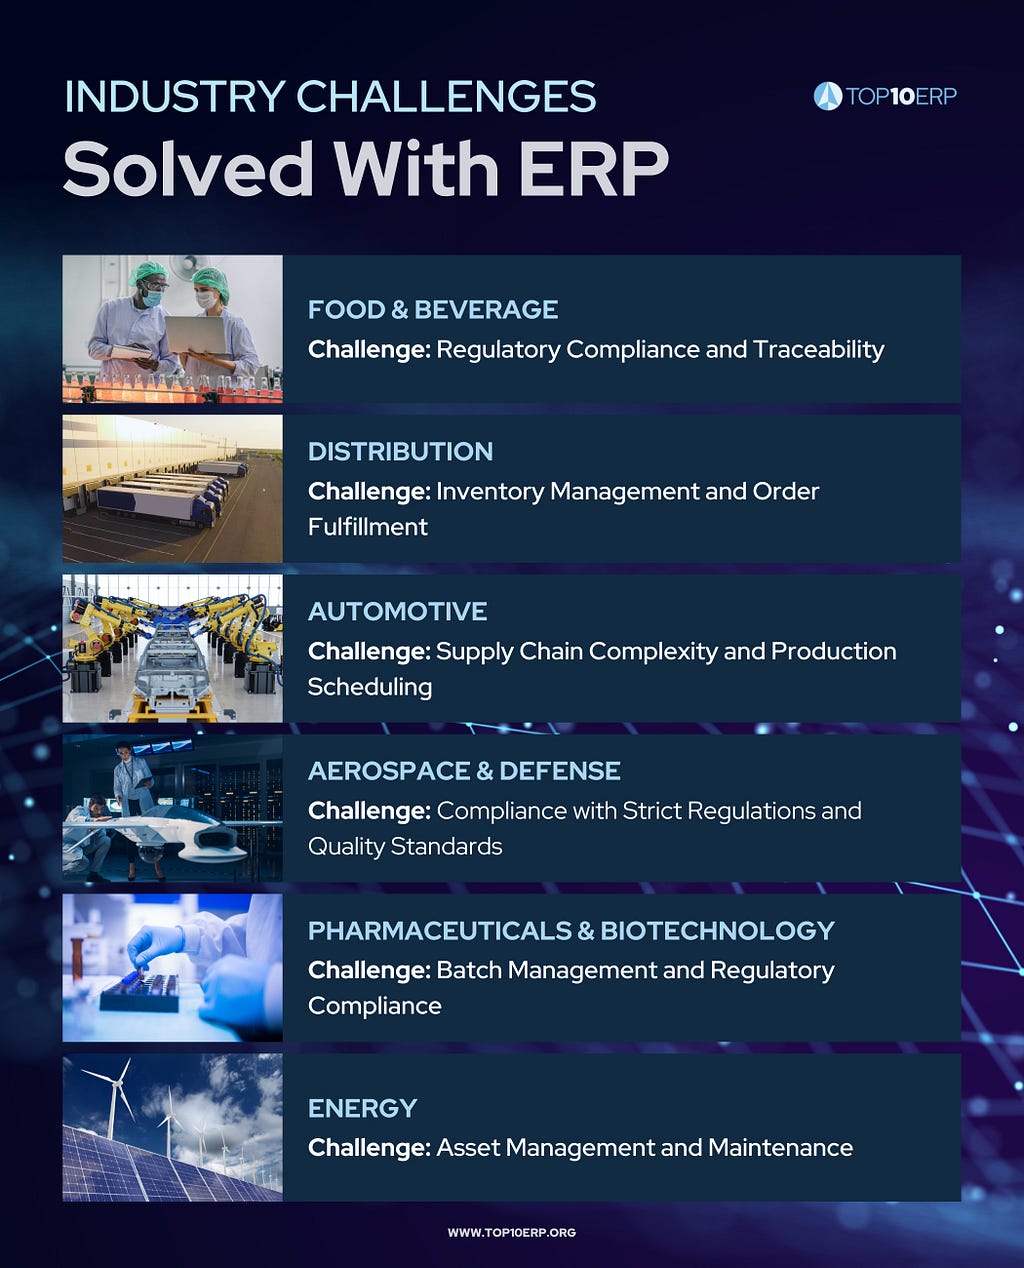 ERP Industry Challenges Solved